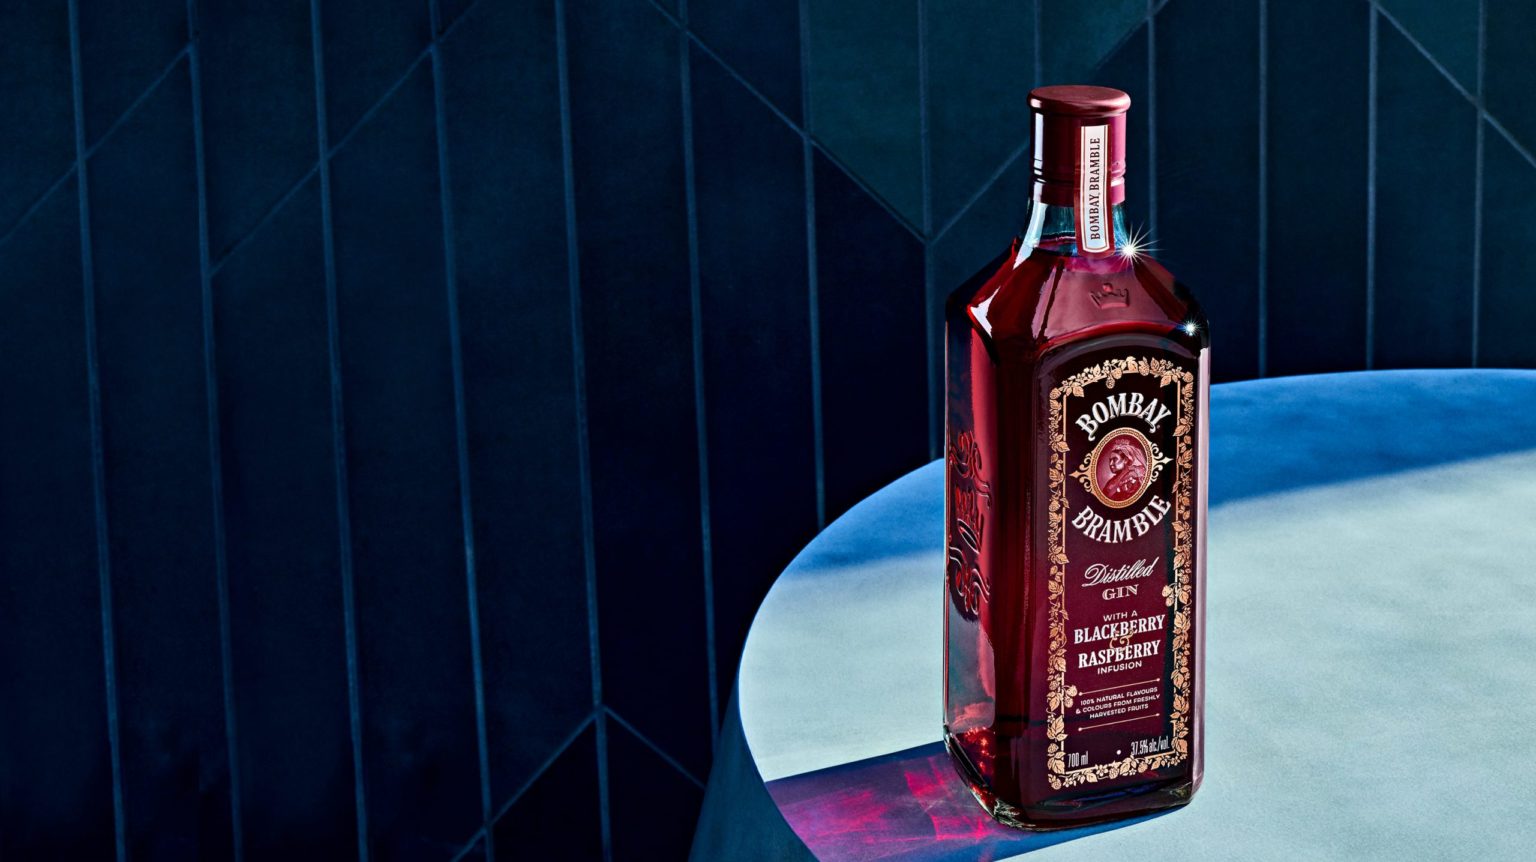 ‘Ripe for discovery’ – Delhi Duty Free introduces Bombay Bramble gin